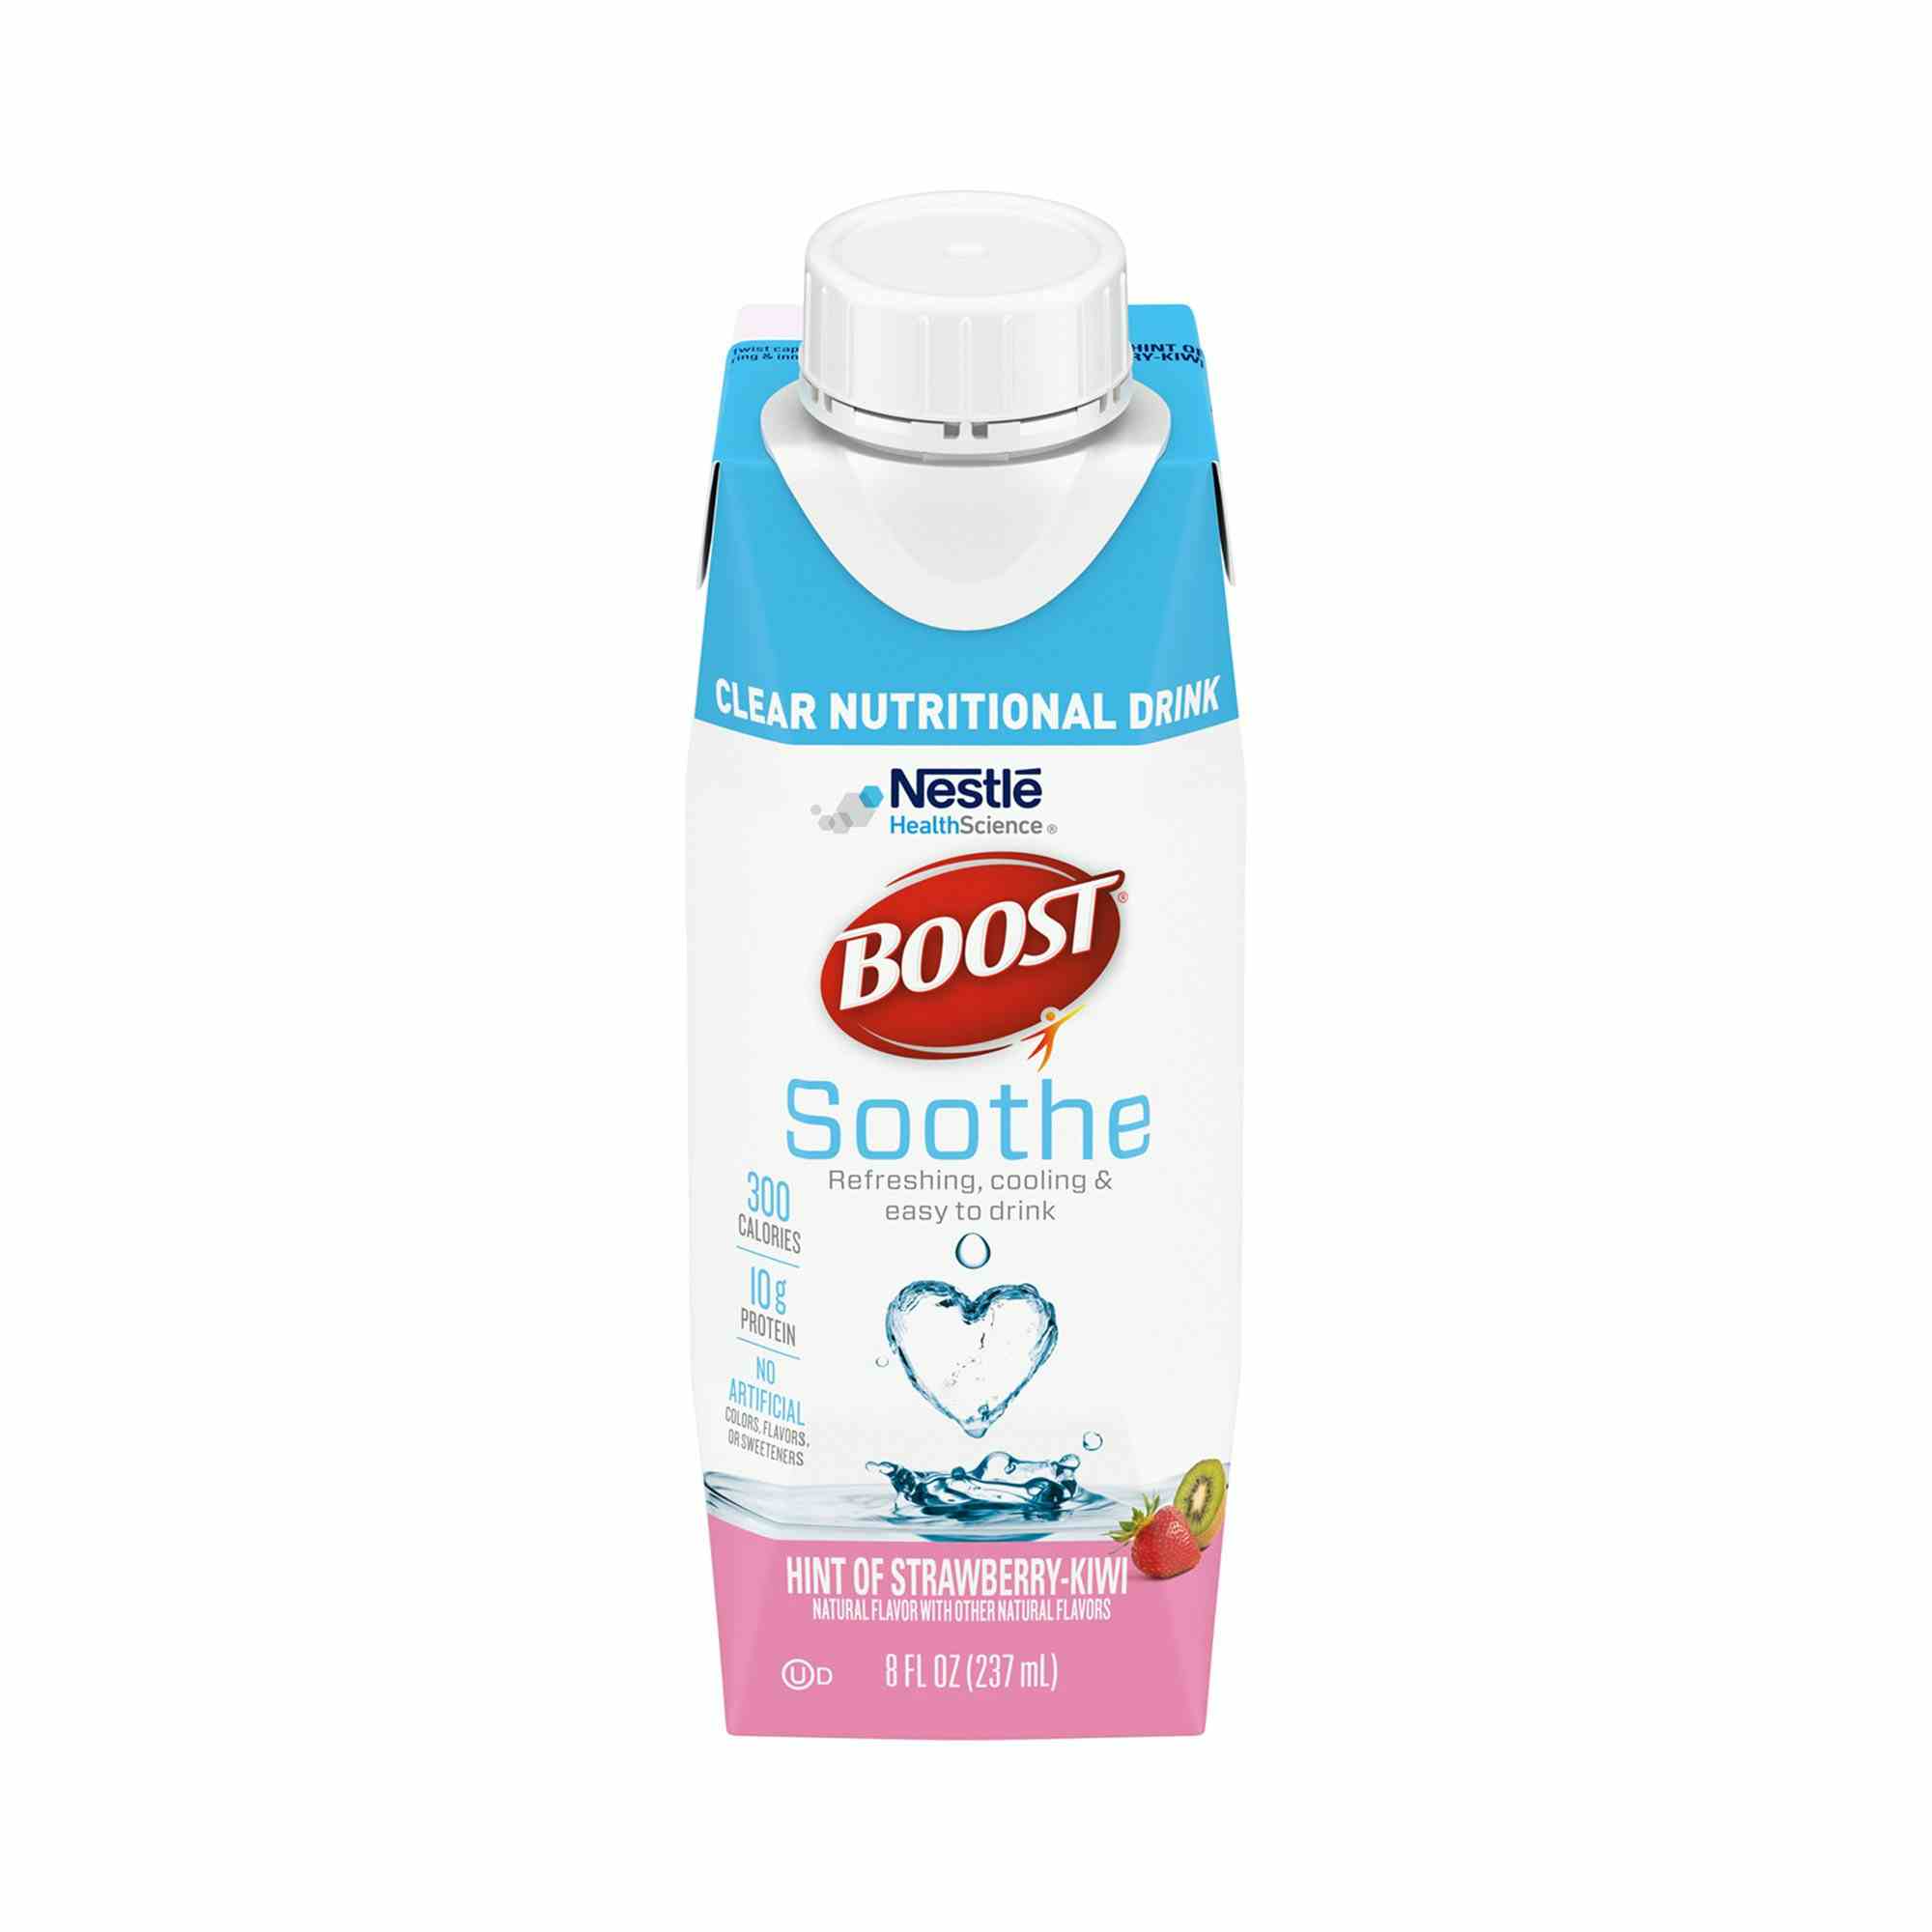 Boost Soothe Clear Nutritional Drink, Carton, 8 oz., Strawberry Kiwi, 00043900769462, Case of 24